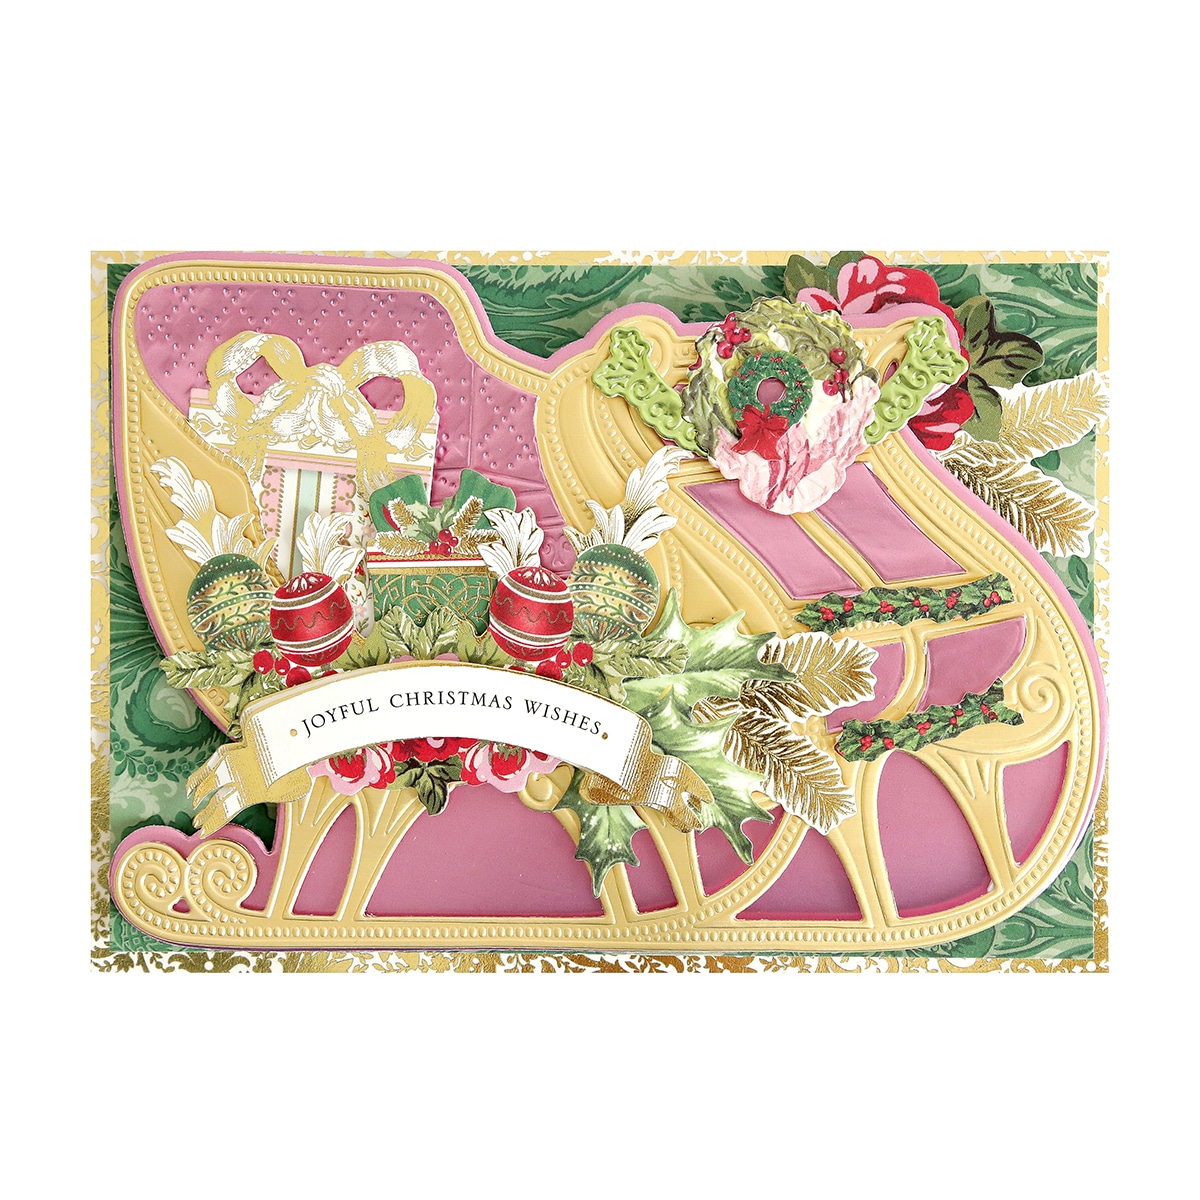 A christmas card with a sleigh and decorations.